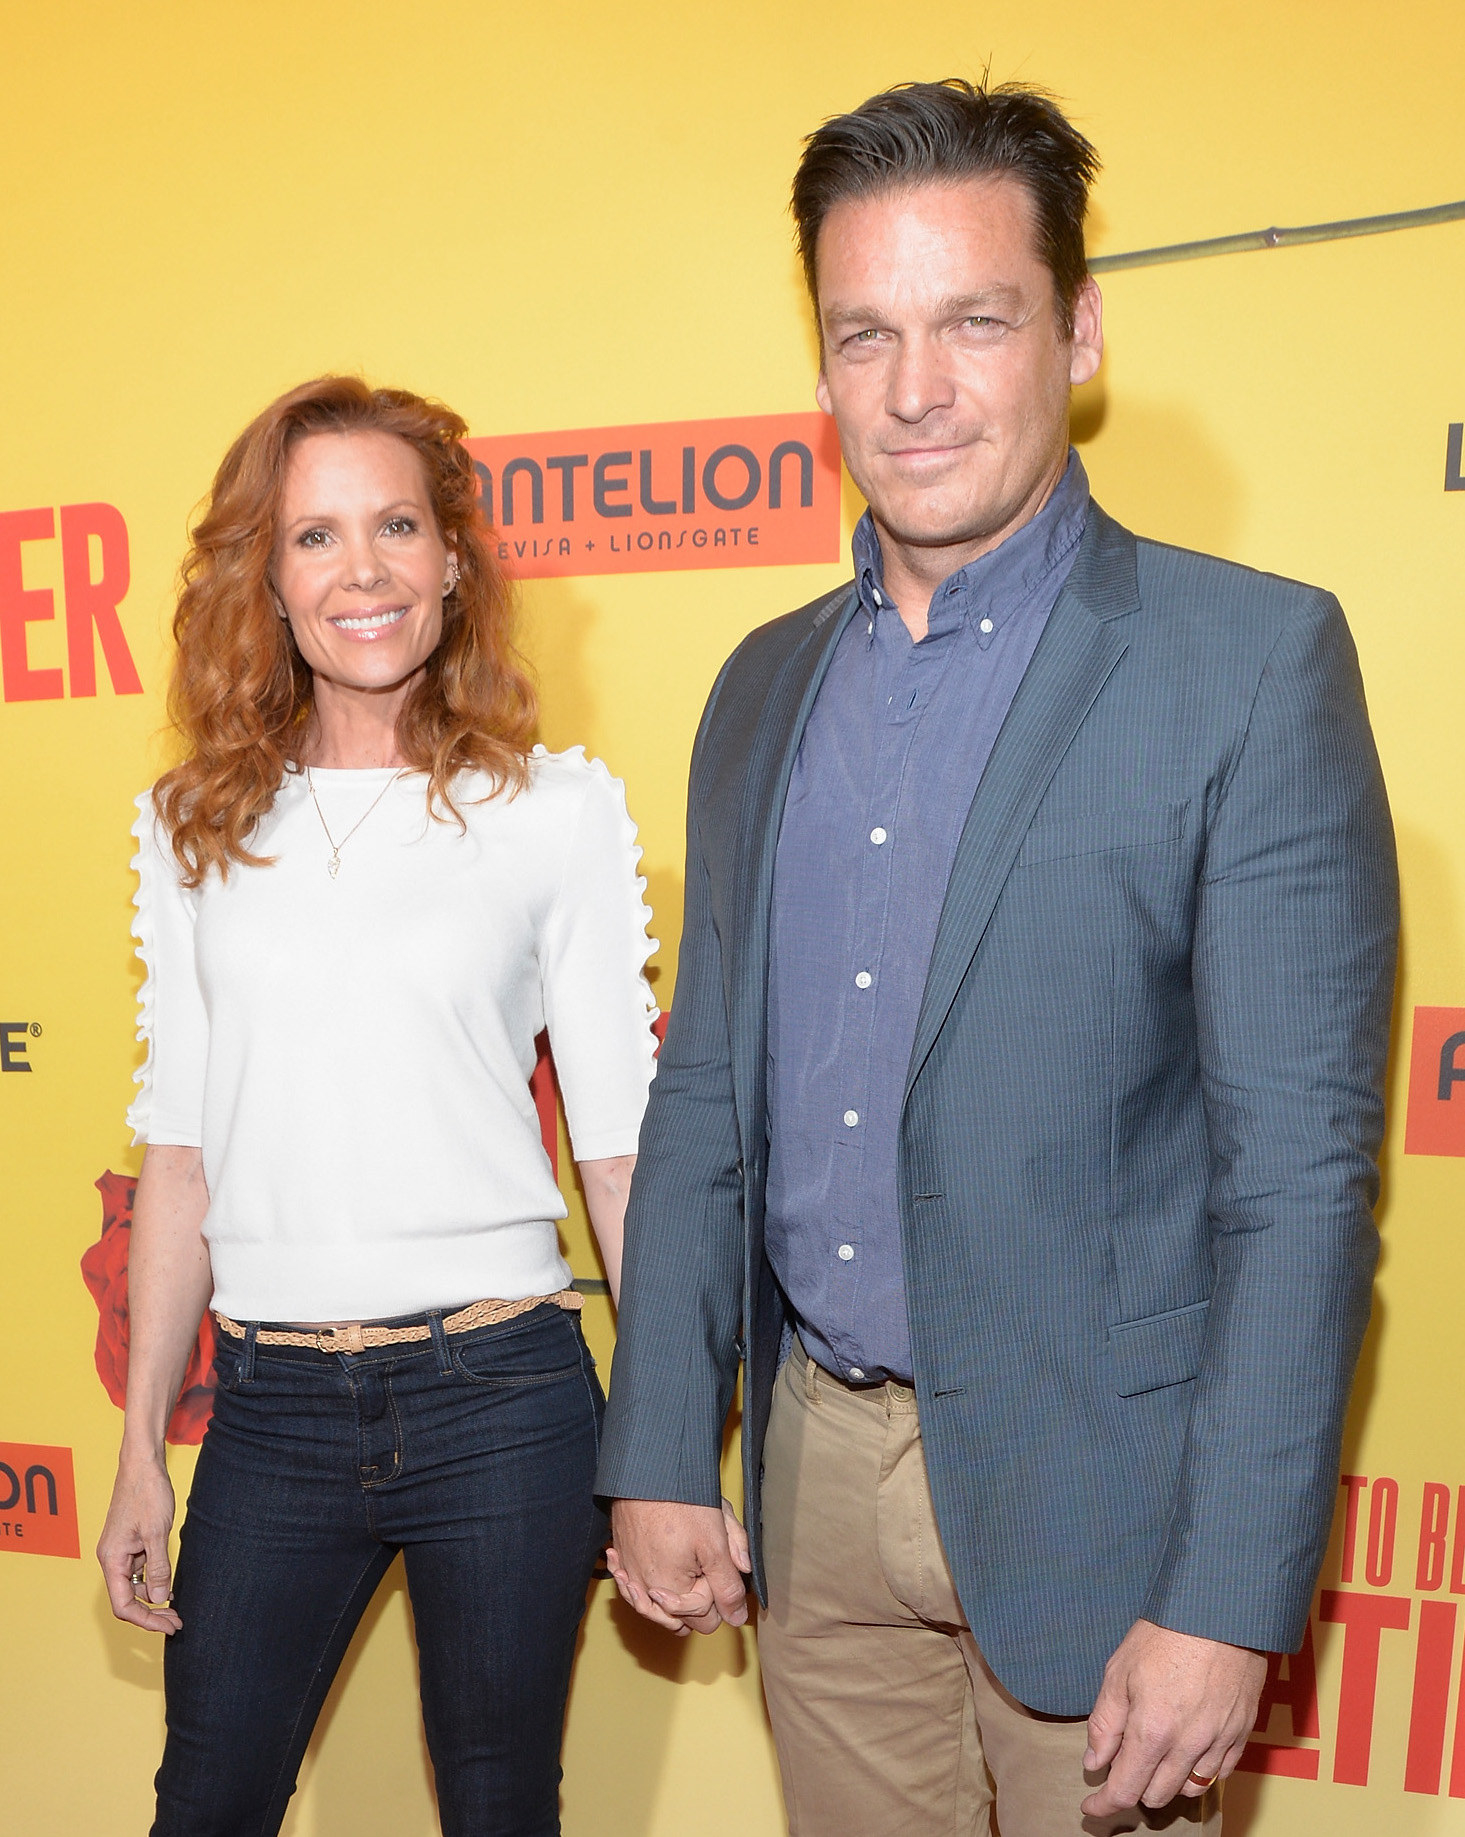 Robyn Lively and Bart Johnson